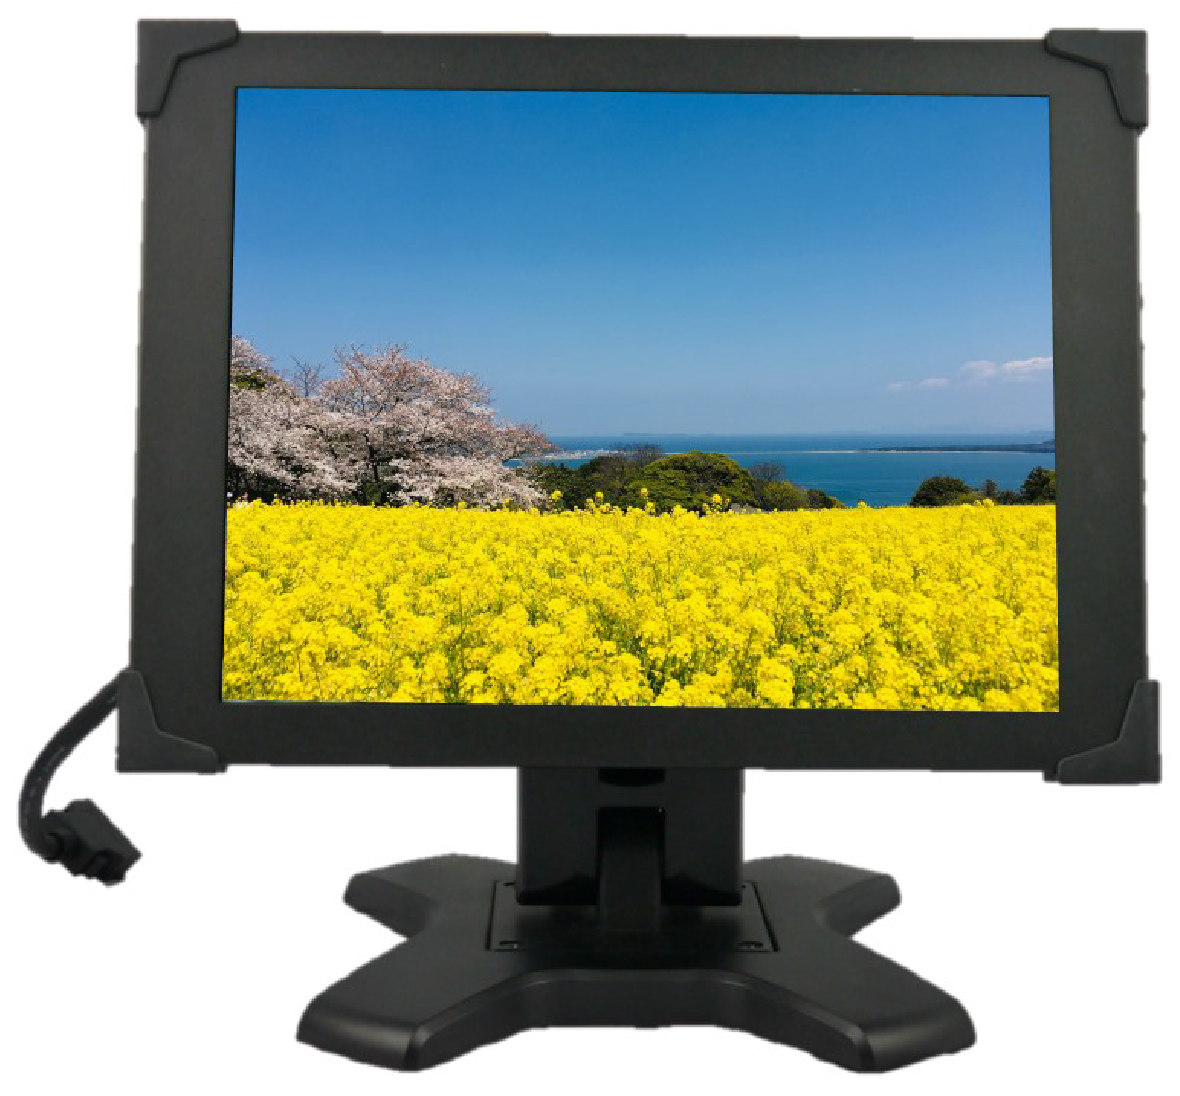 SEF121TPC-LXH-FI is an industrial waterproof touch monitor which can be used to any kinds of vehicles.